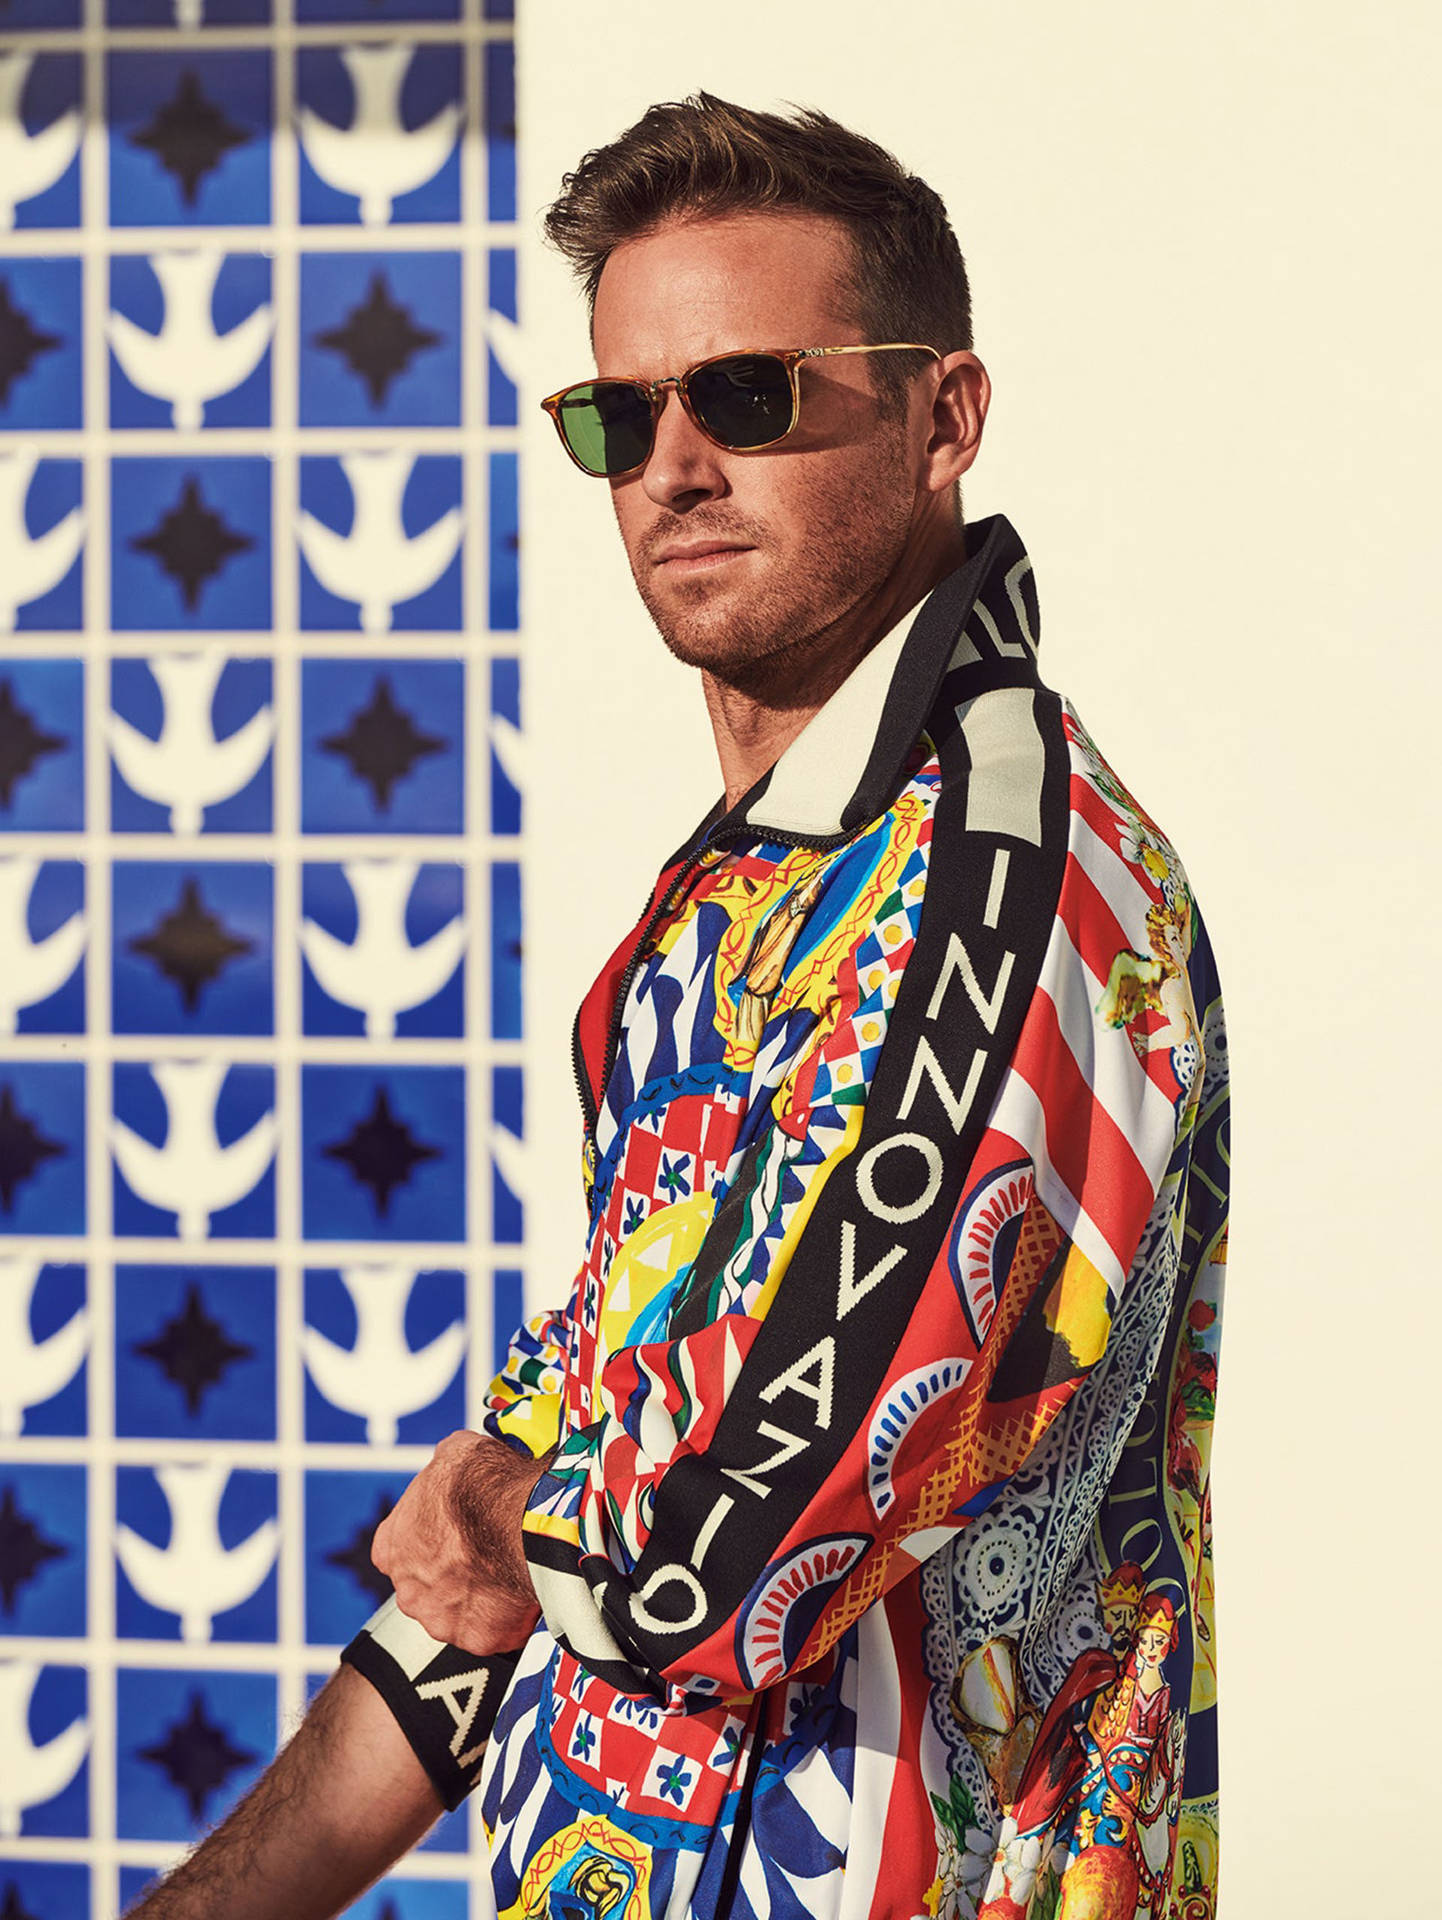 Armie Hammer Gq Colorful Jacket Background